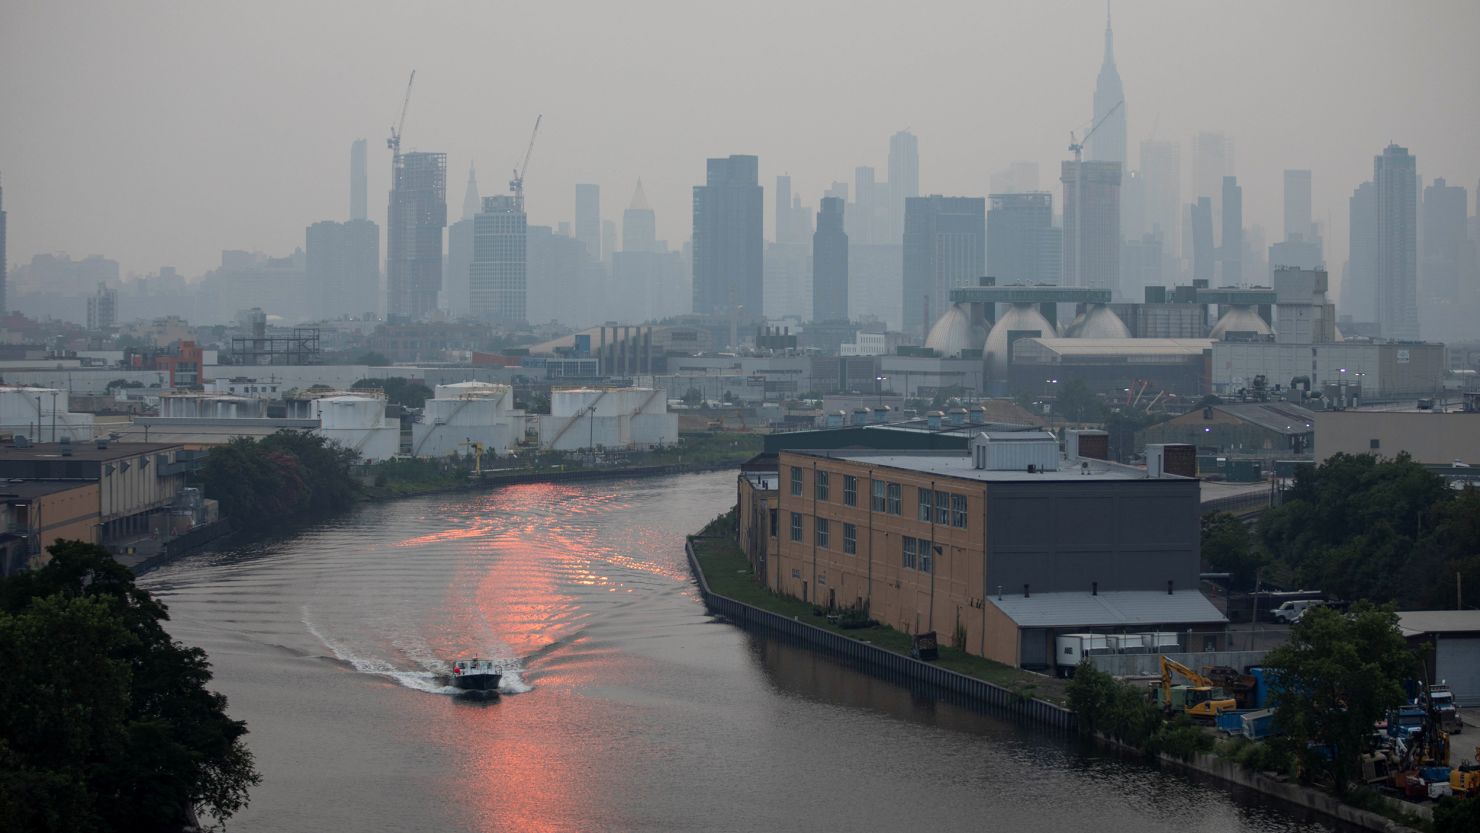 The Manhattan skyline was shrouded in a thick haze in July as a result of smoke from the wildfires in the Western United States.